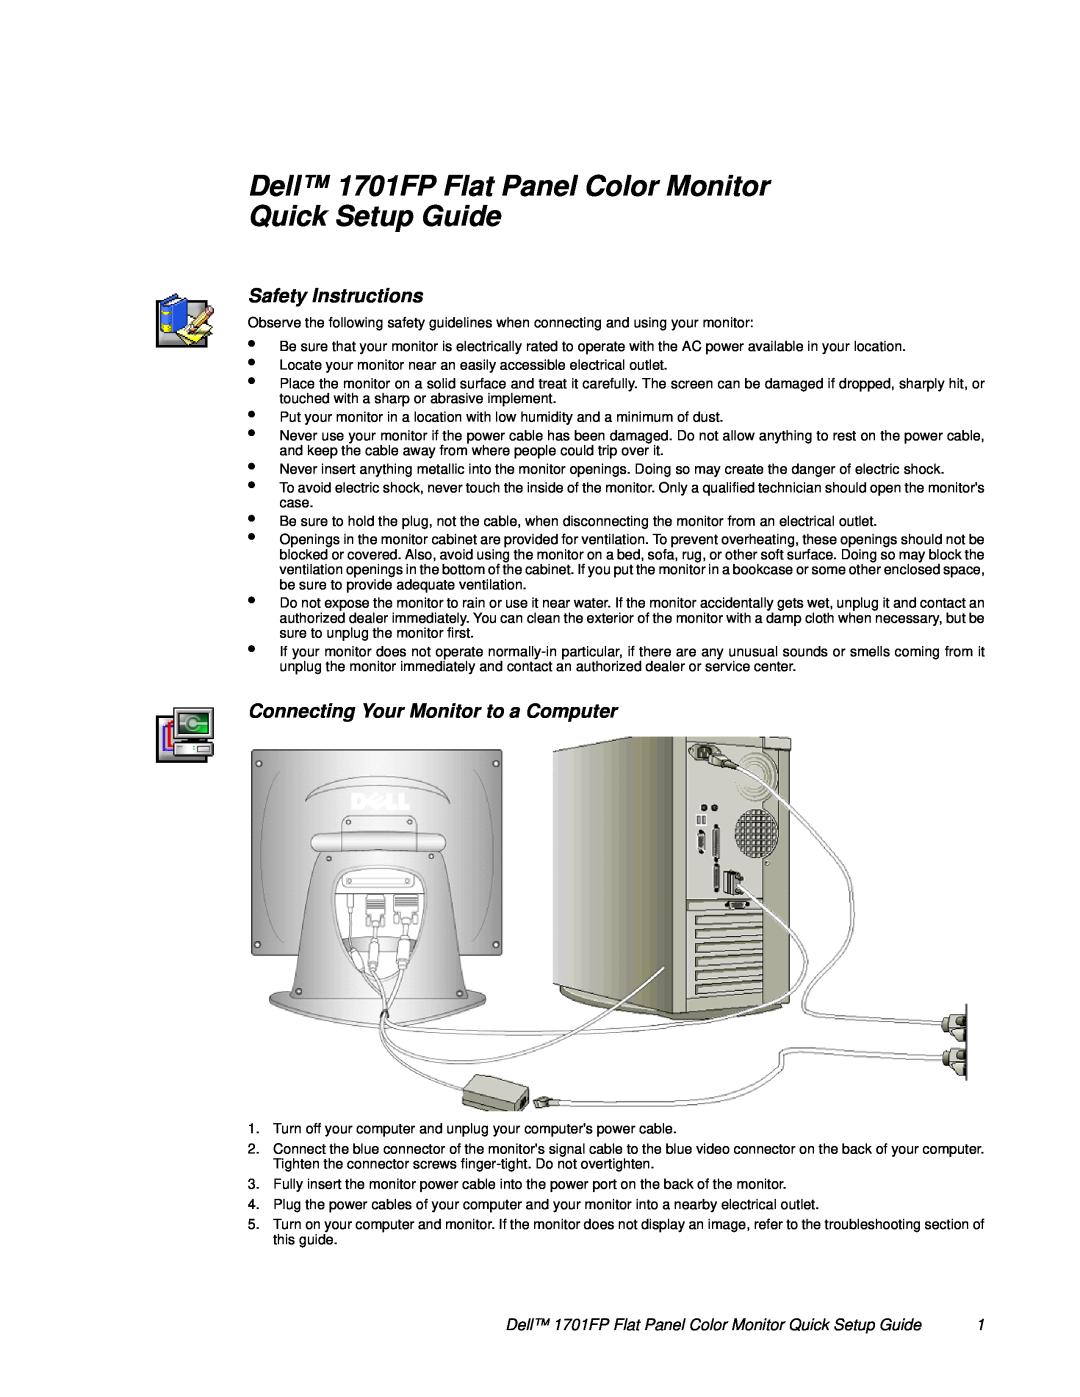 Dell 1701FP setup guide Safety Instructions, Connecting Your Monitor to a Computer 